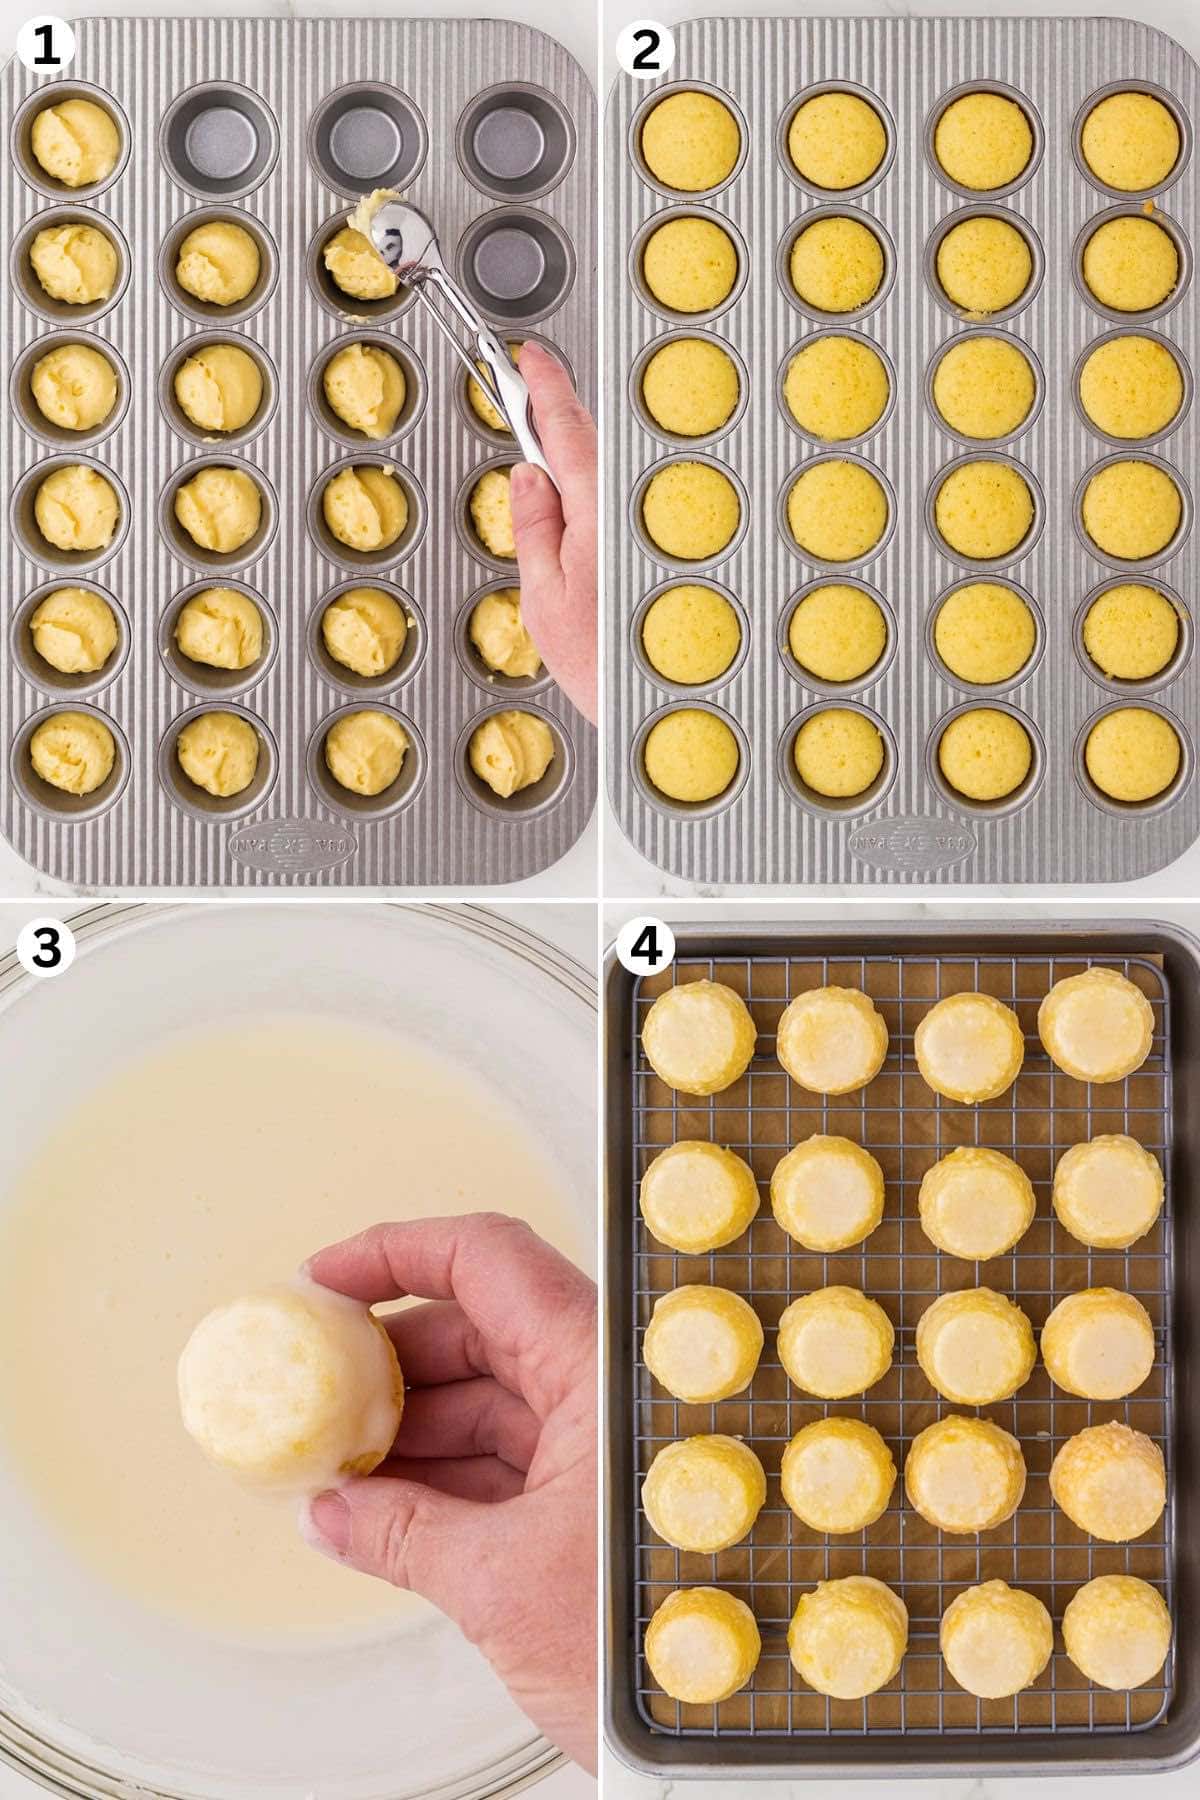 Fill each mini muffin cup with batter and bake. drop into the glaze and place in cooling rack.